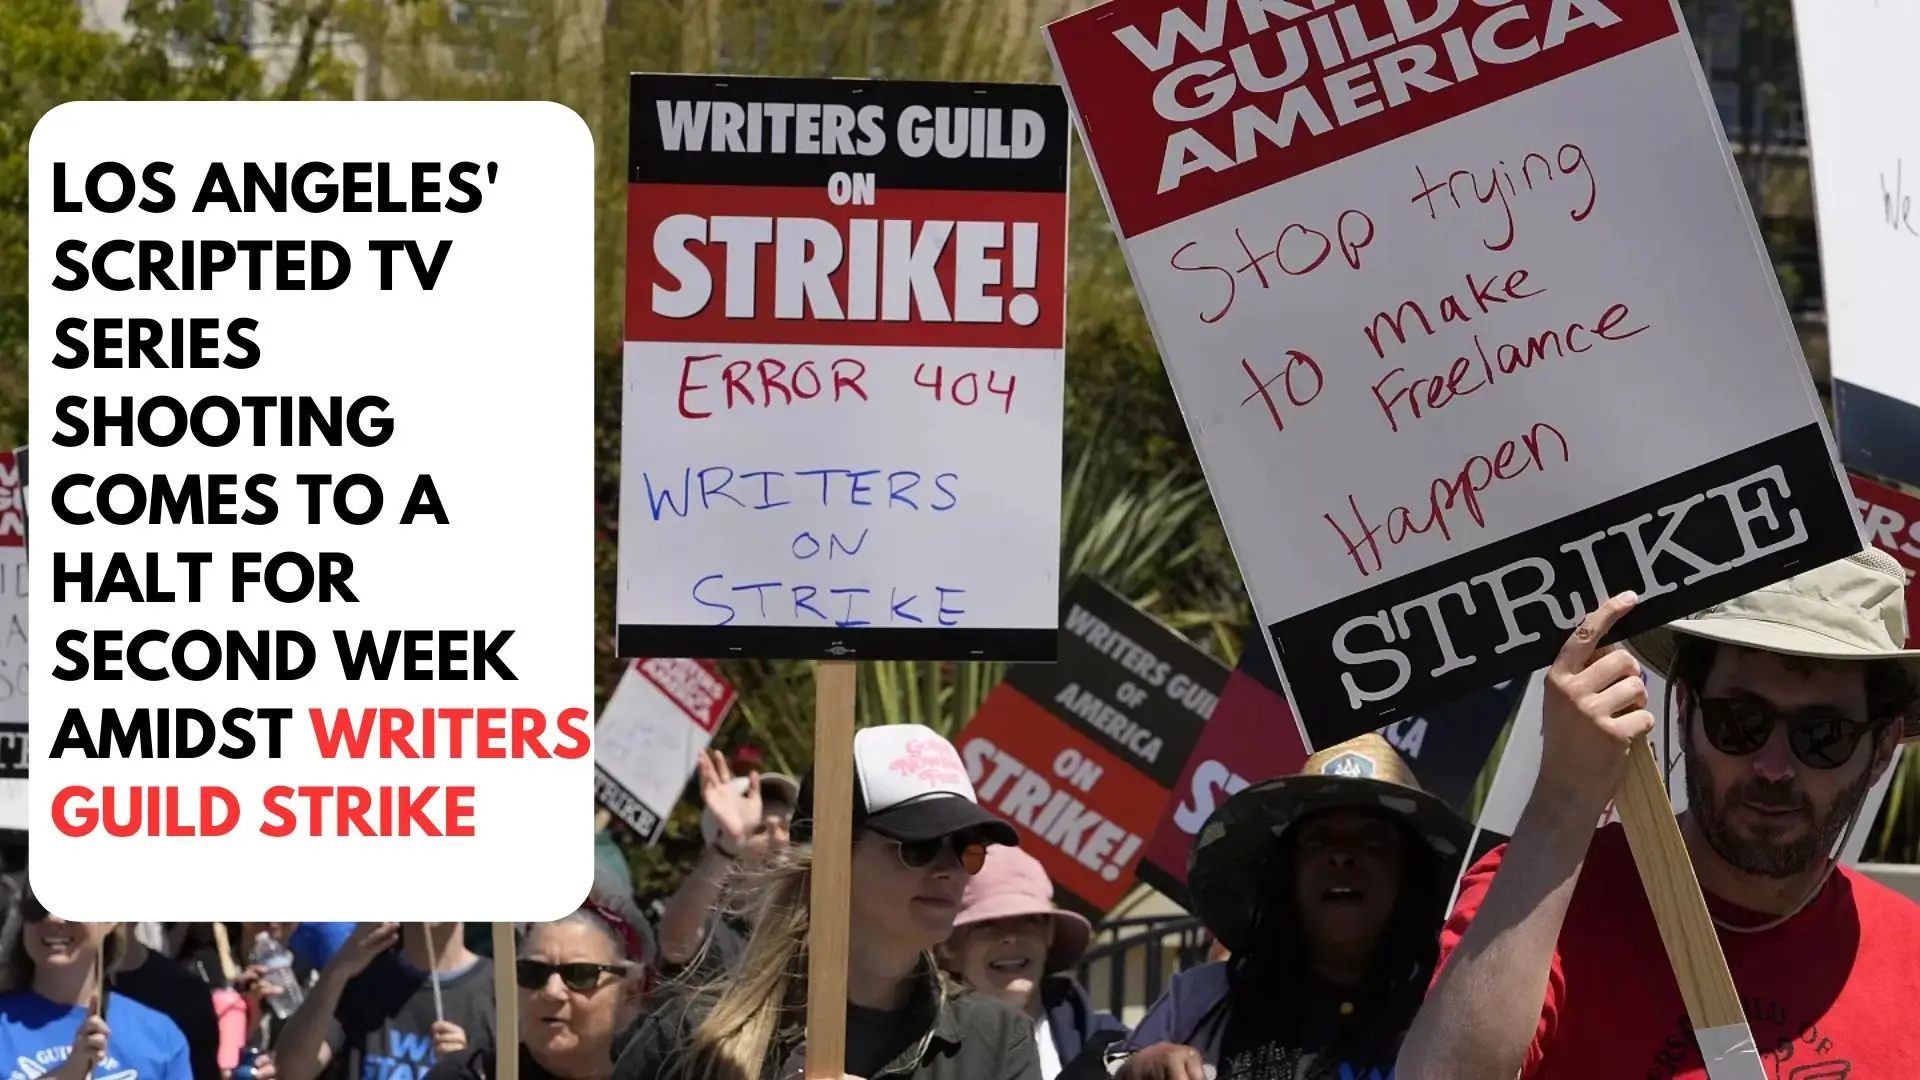 Los Angeles' Scripted TV Series Shooting Comes to a Halt for Second Week Amidst Writers Guild Strike